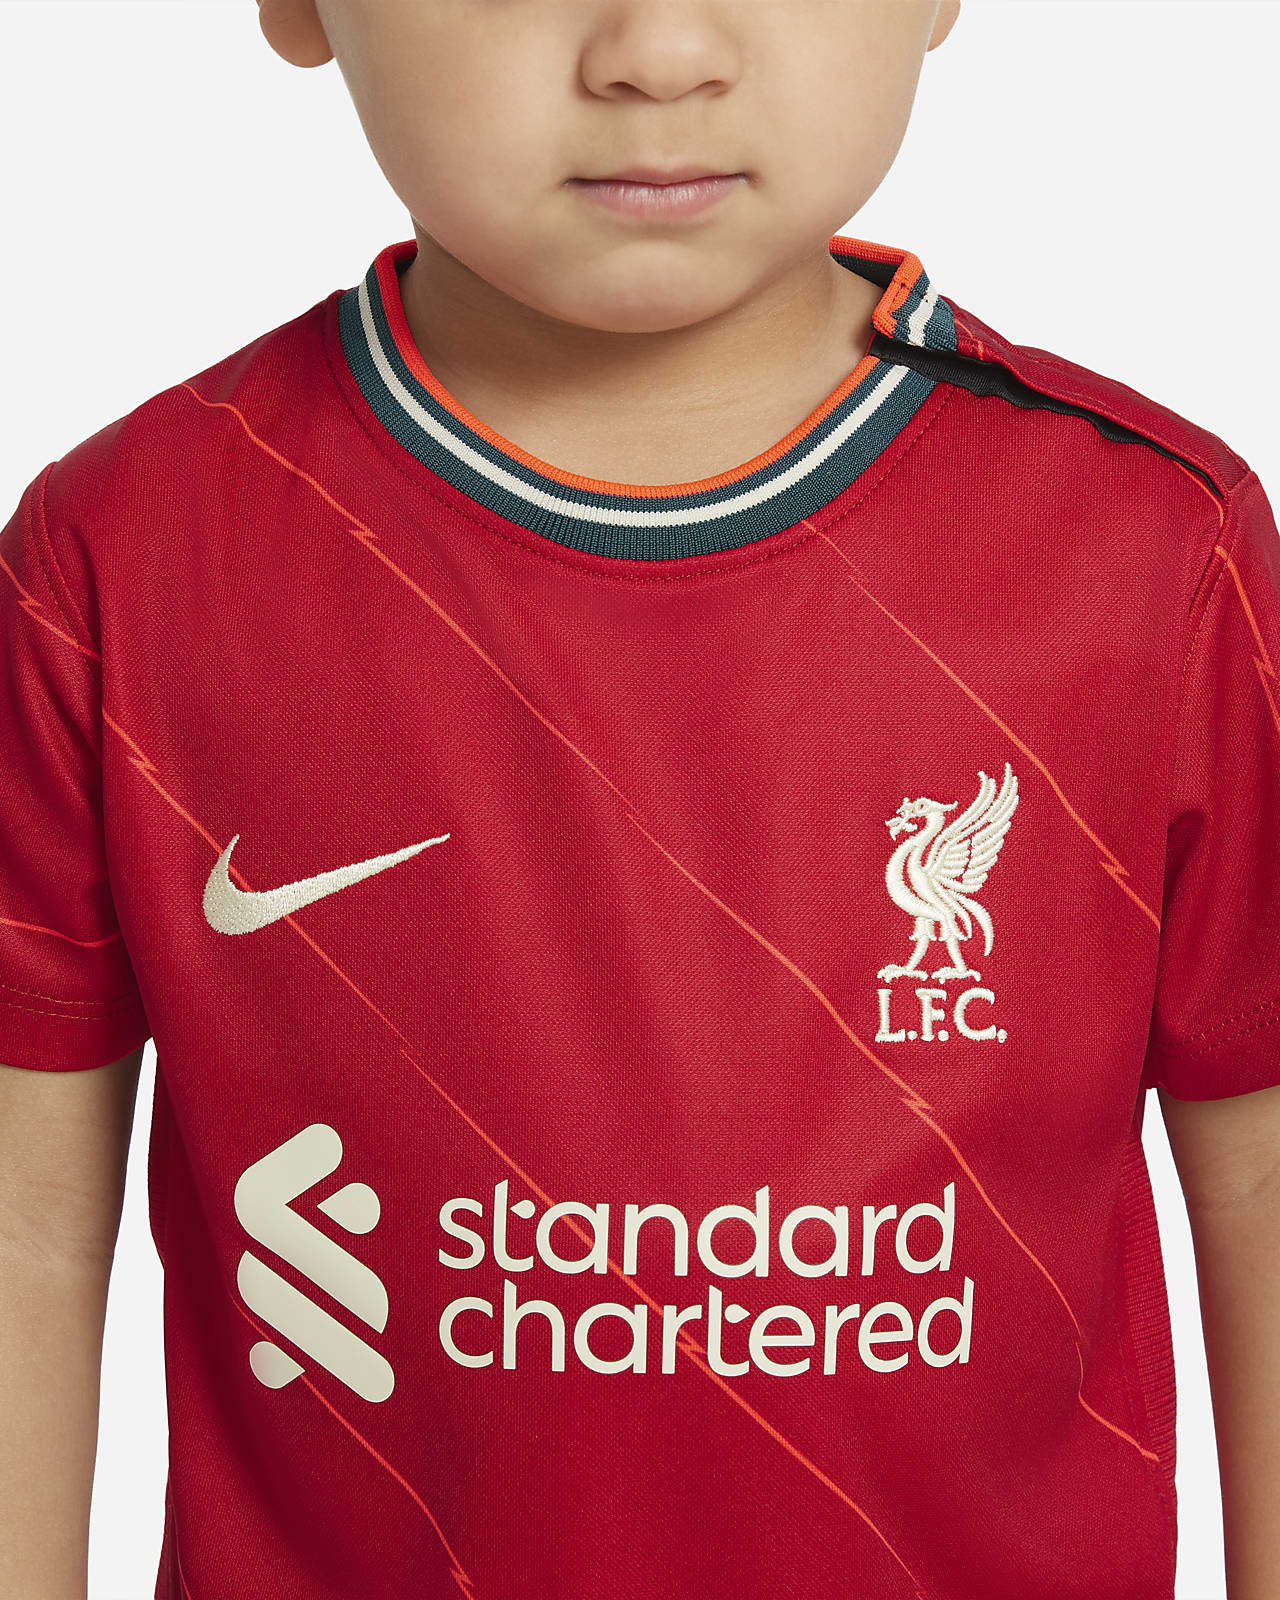 childs liverpool top